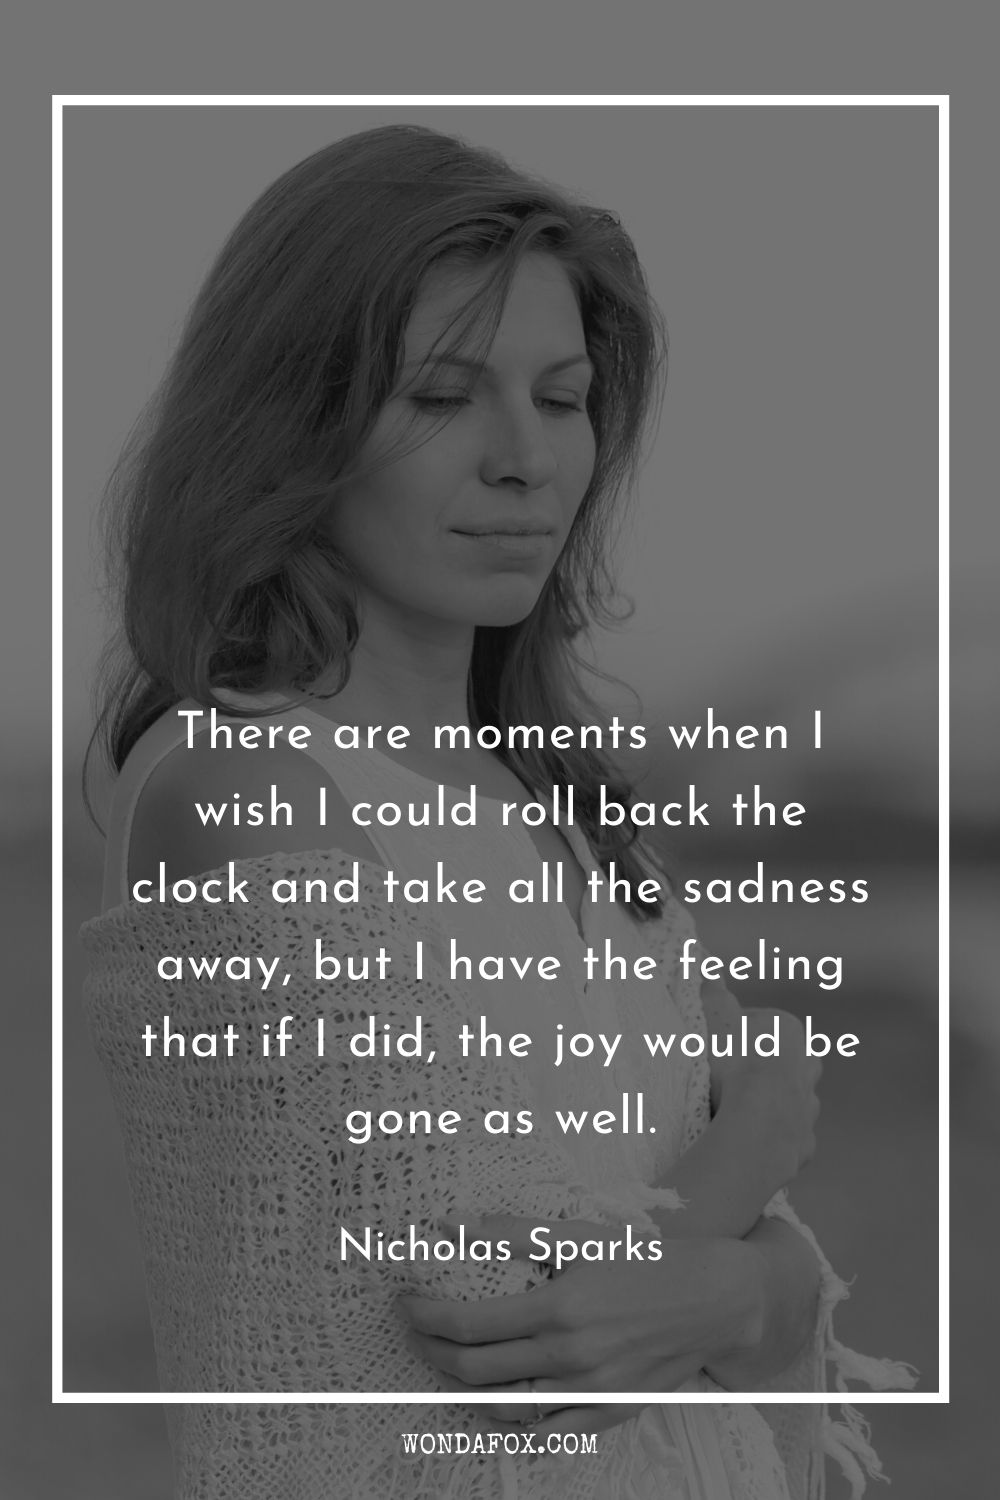 There are moments when I wish I could roll back the clock and take all the sadness away, but I have the feeling that if I did, the joy would be gone as well.